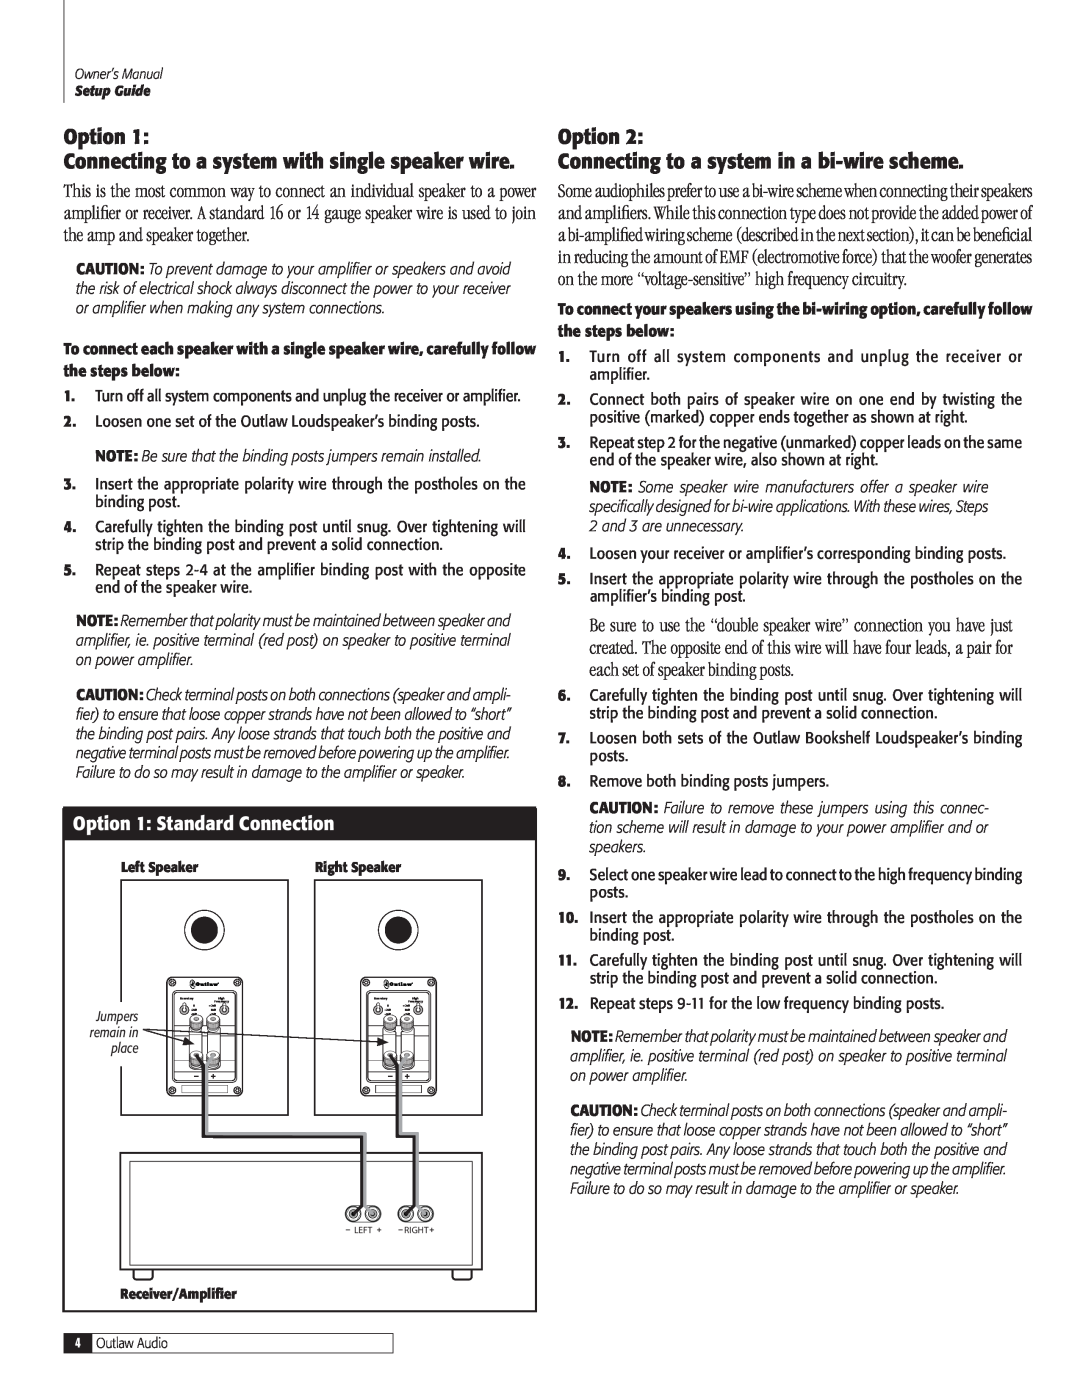 Outlaw Audio BLS-B(C) owner manual Option Connecting to a system with single speaker wire, Option 1 Standard Connection 